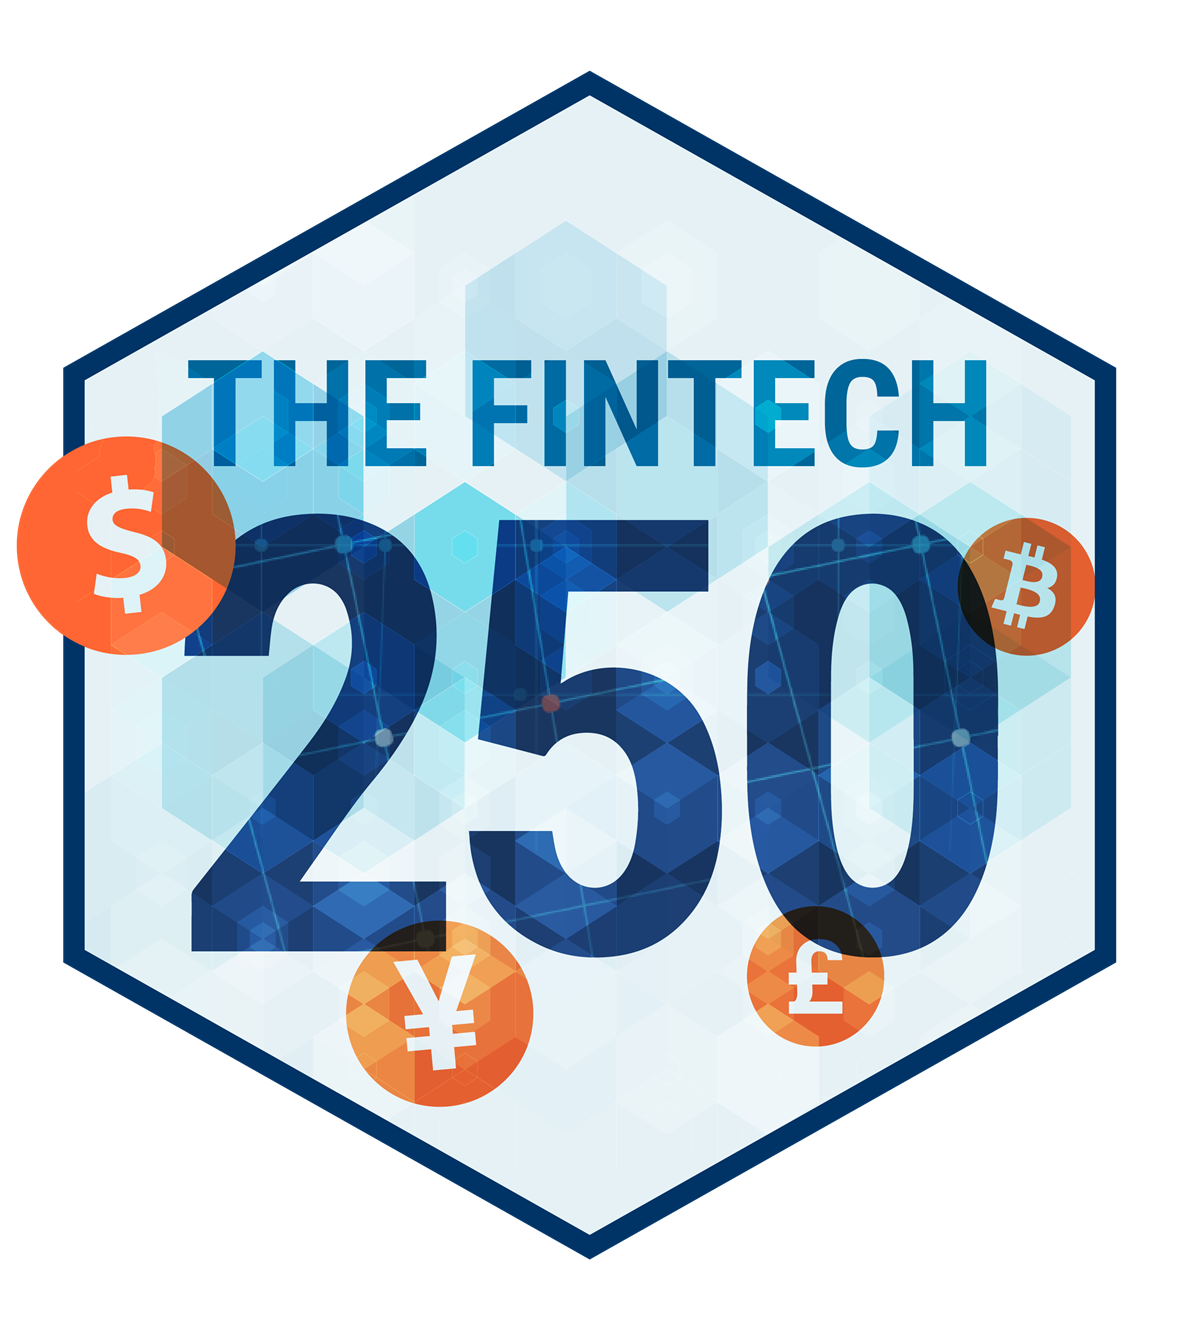 The Fintech 250 recognizes emerging private companies working on groundbreaking financial technology.